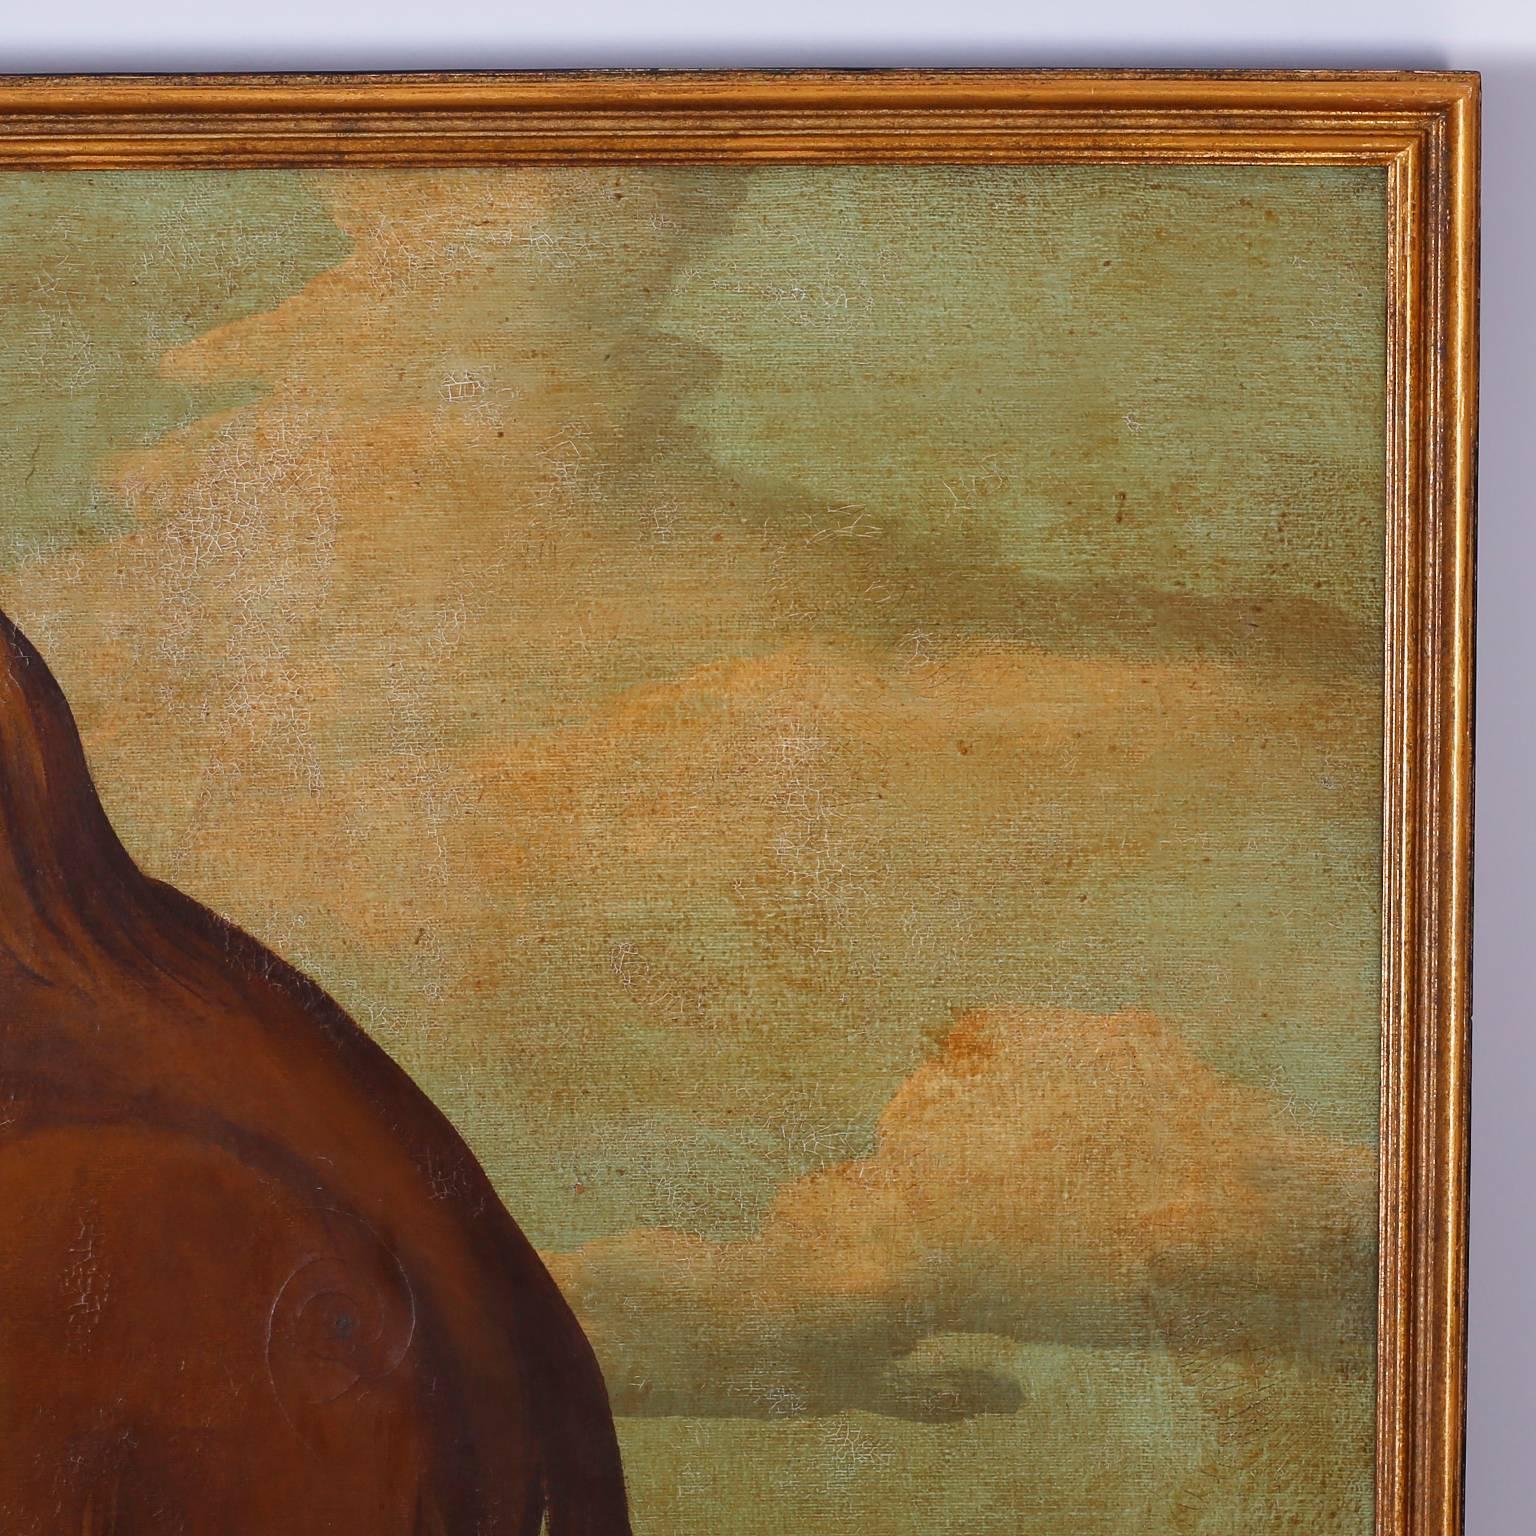 British Colonial Oil Painting on Canvas of a Camel by William Skilling